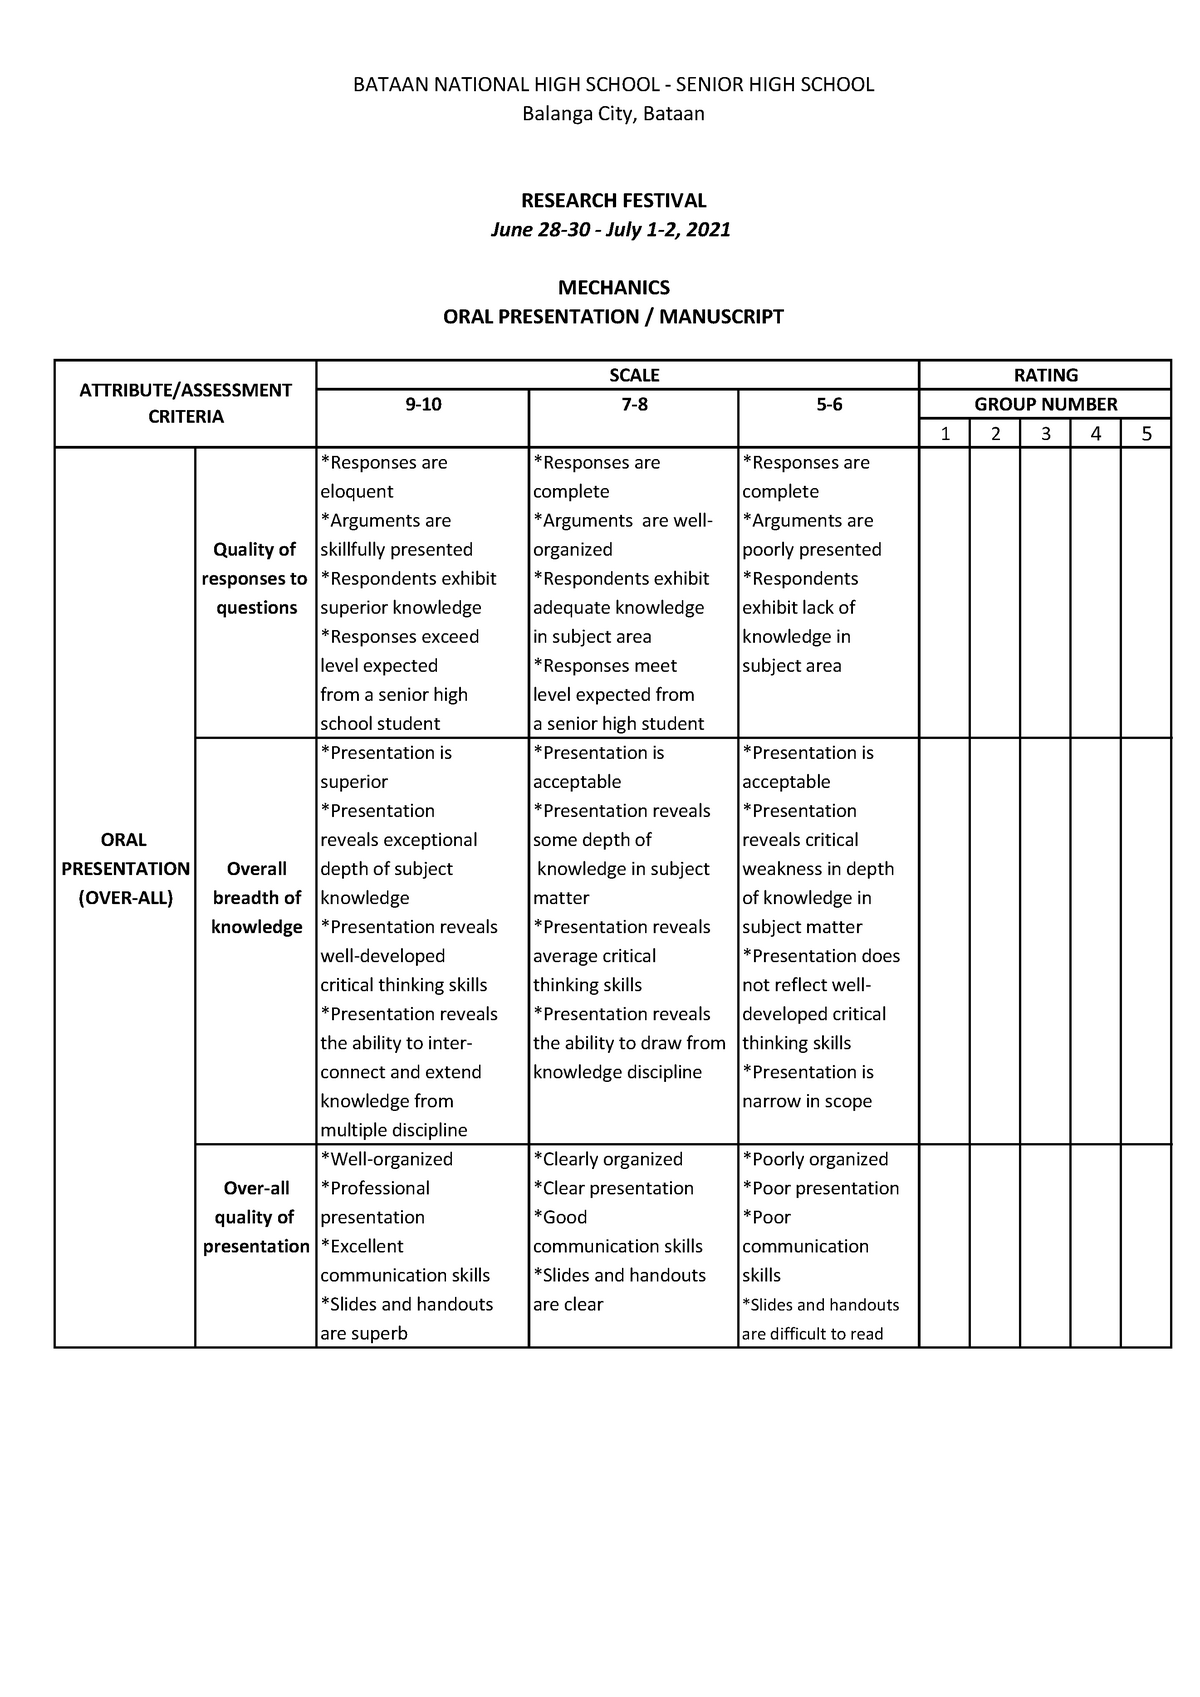 rubric for oral defense of research paper